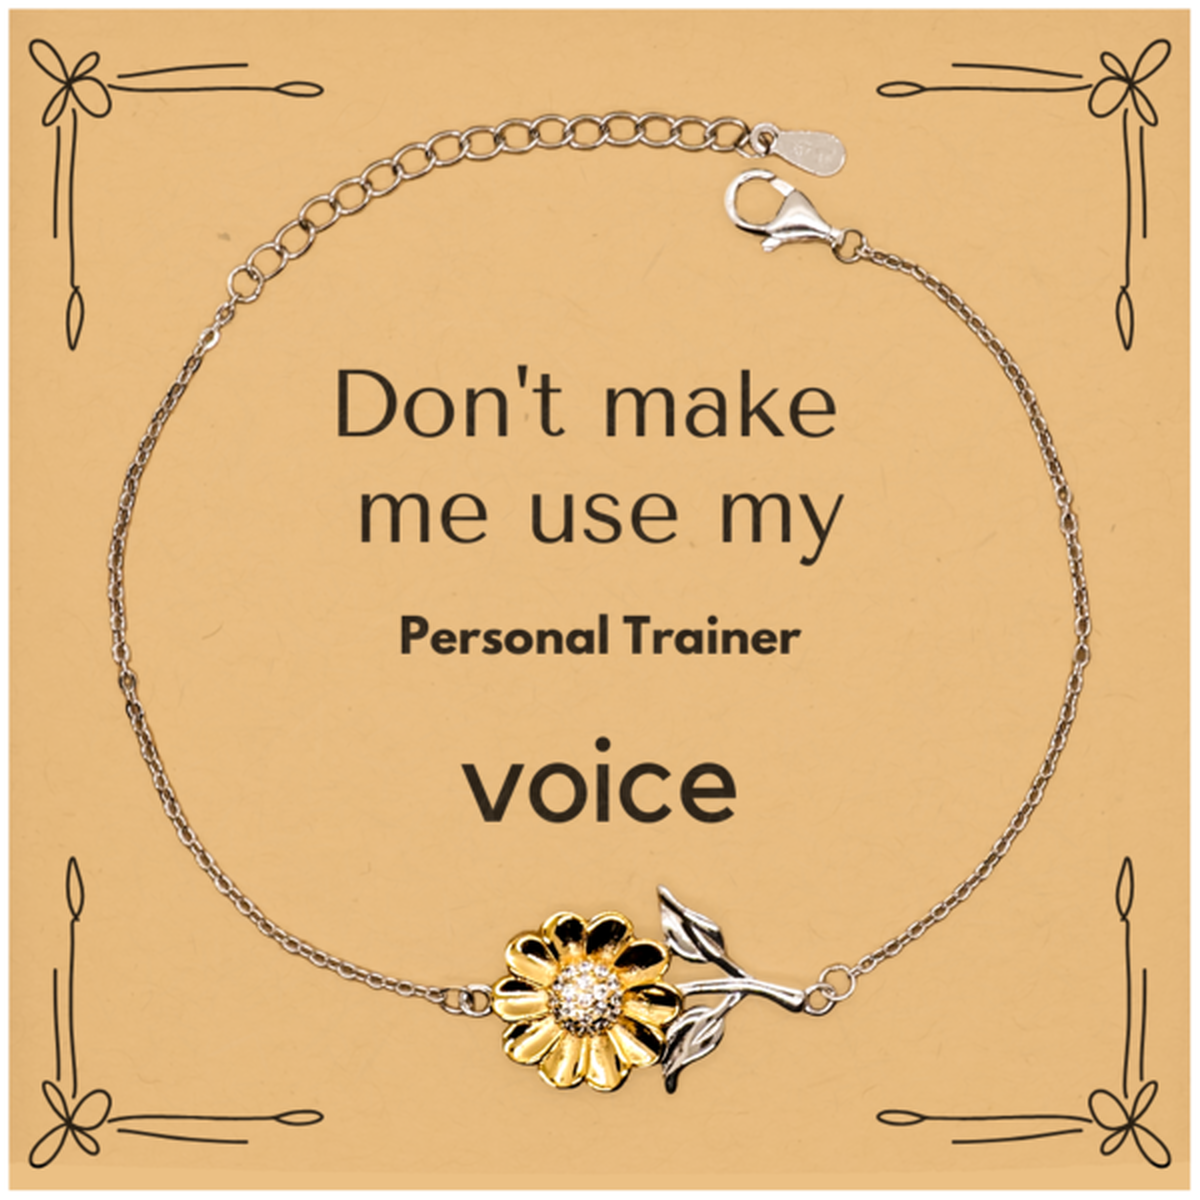 Don't make me use my Personal Trainer voice, Sarcasm Personal Trainer Card Gifts, Christmas Personal Trainer Sunflower Bracelet Birthday Unique Gifts For Personal Trainer Coworkers, Men, Women, Colleague, Friends